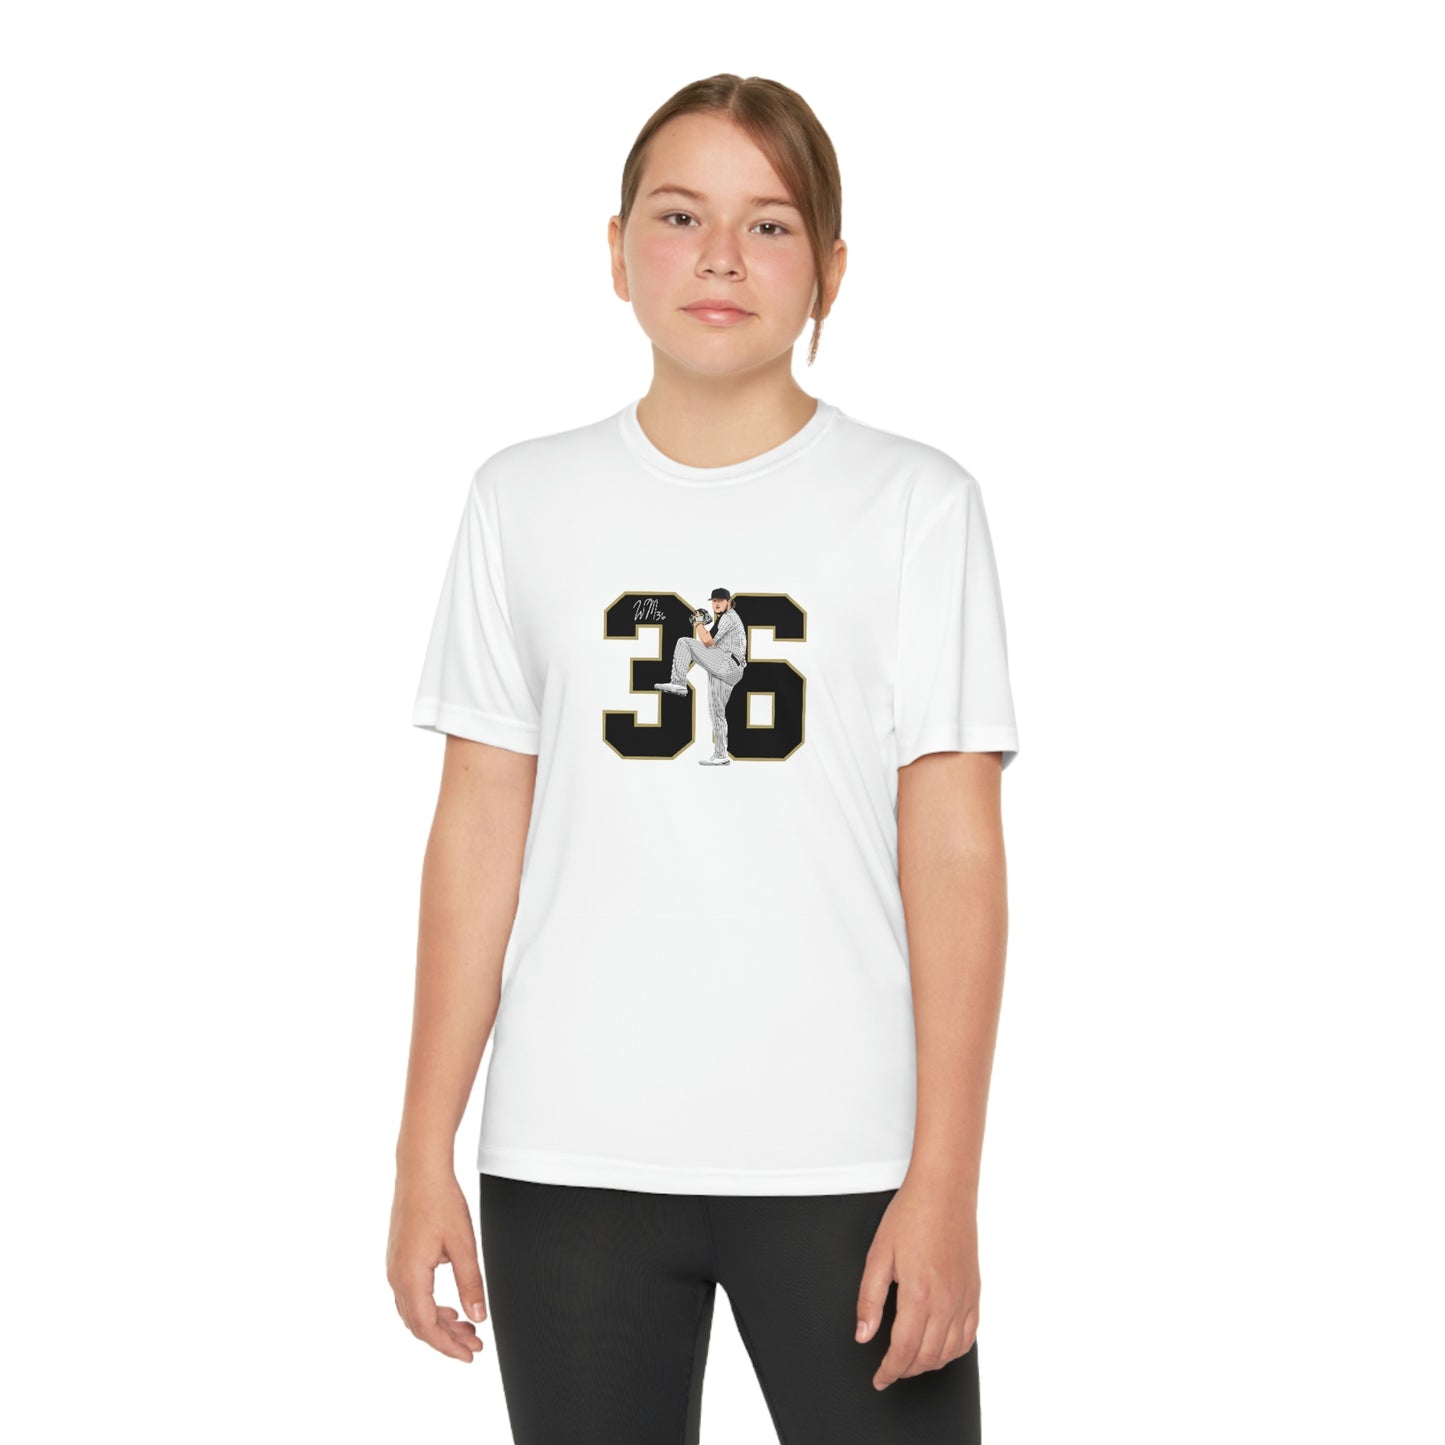 Will Melby YOUTH Performance Shirt